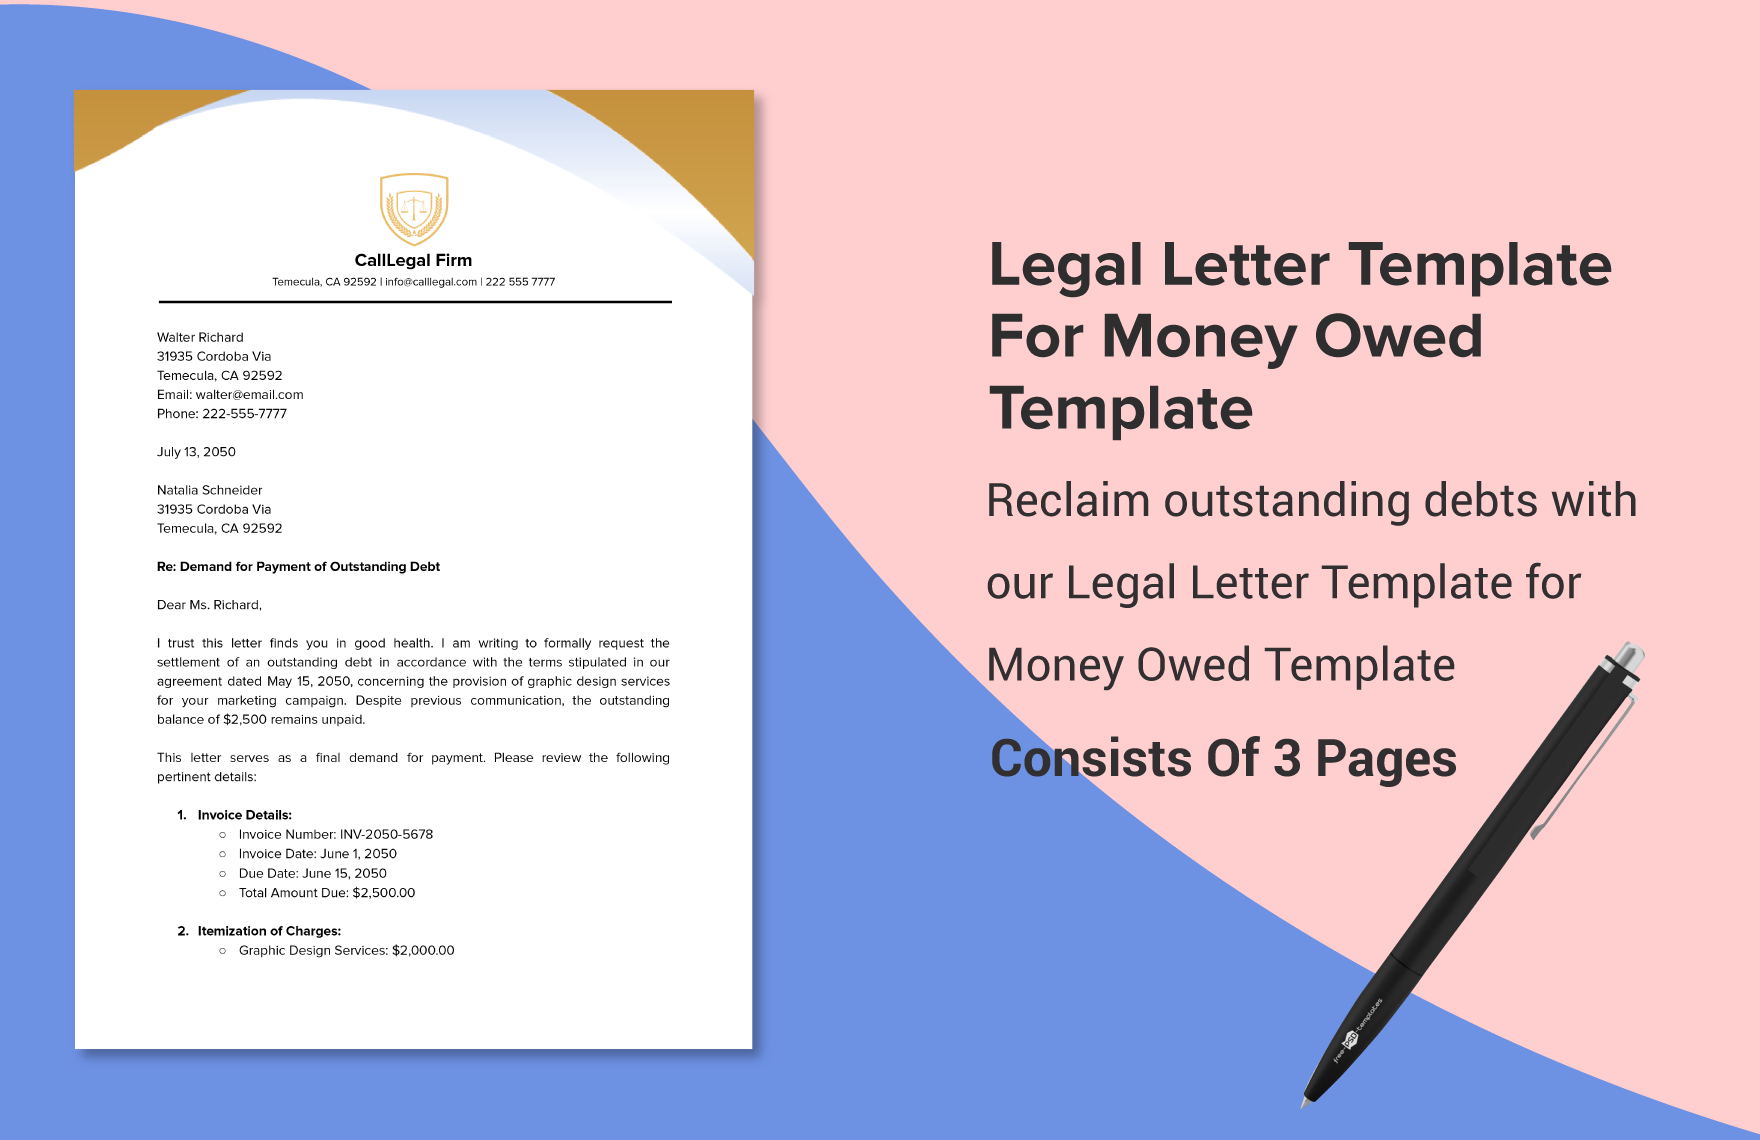 Legal Letter Template for Money Owed Template